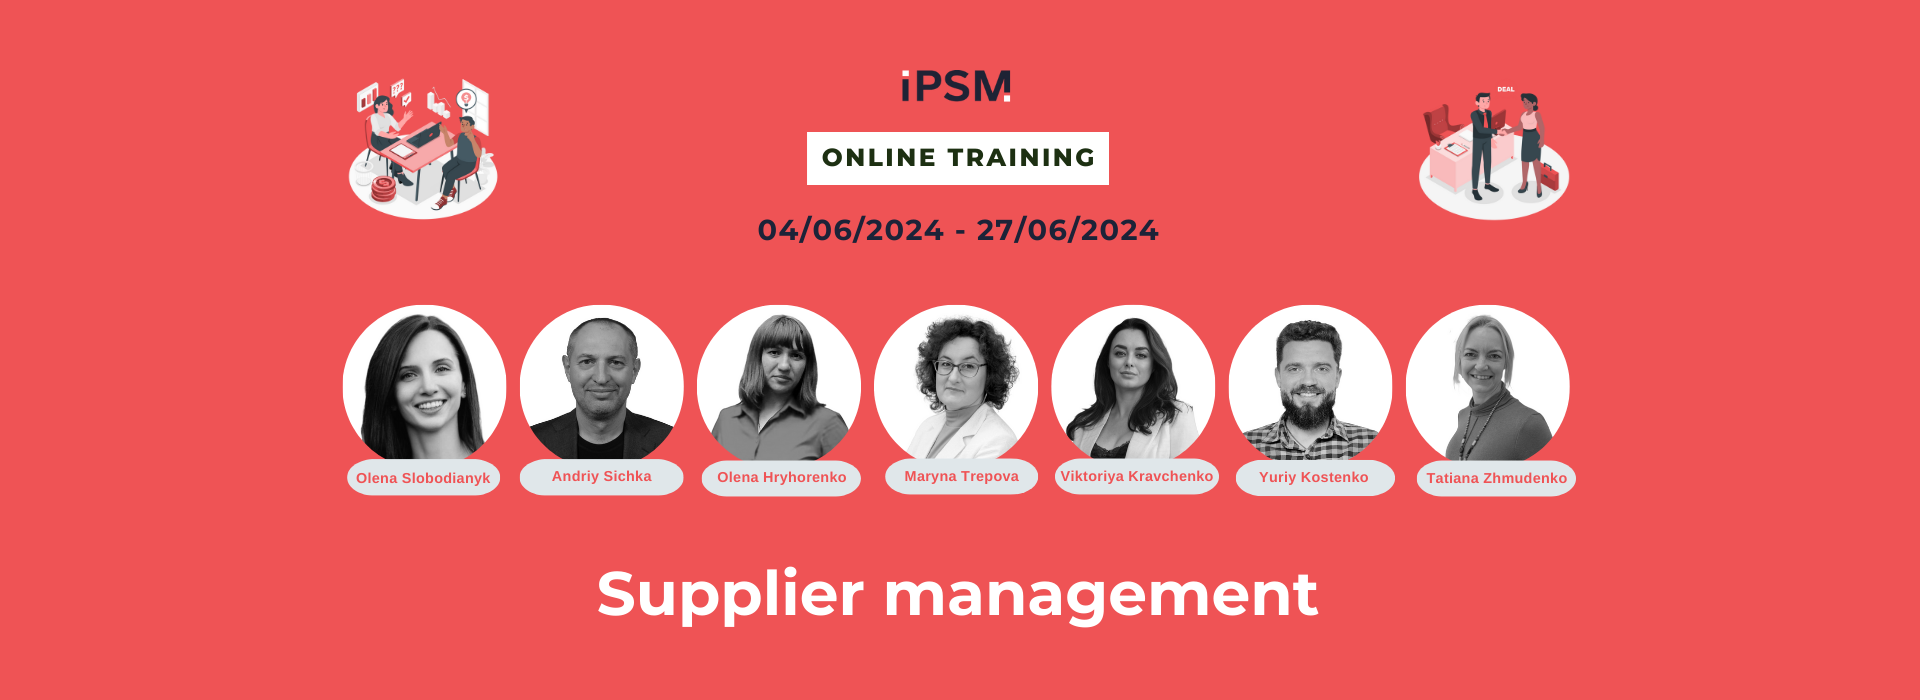 Training on Supplier Management from IPSM